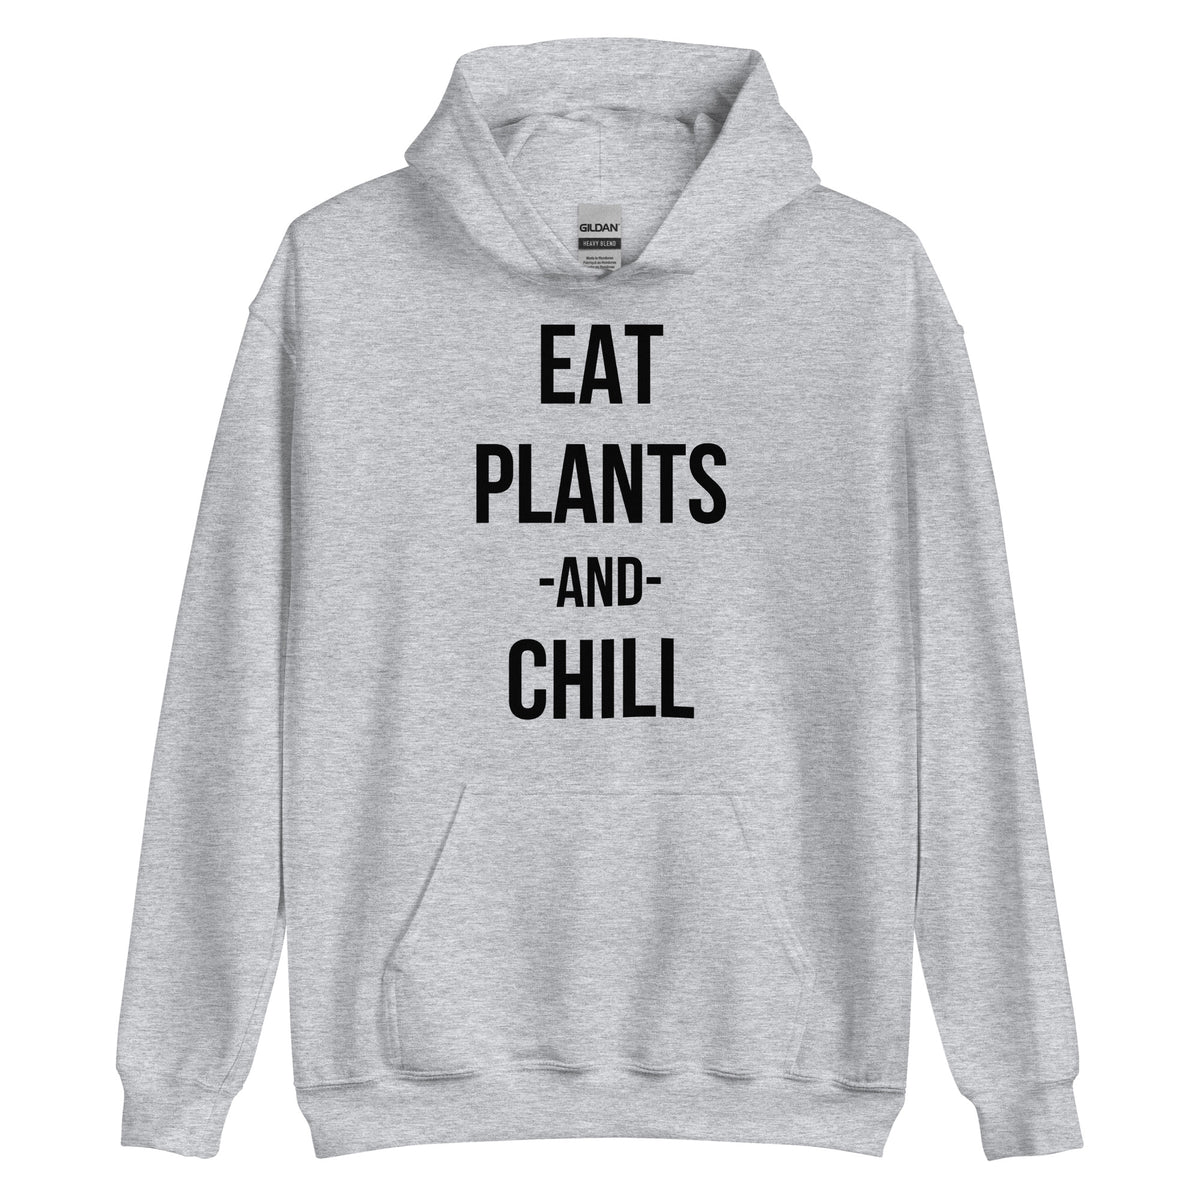 EAT PLANTS AND CHILL Hoodie